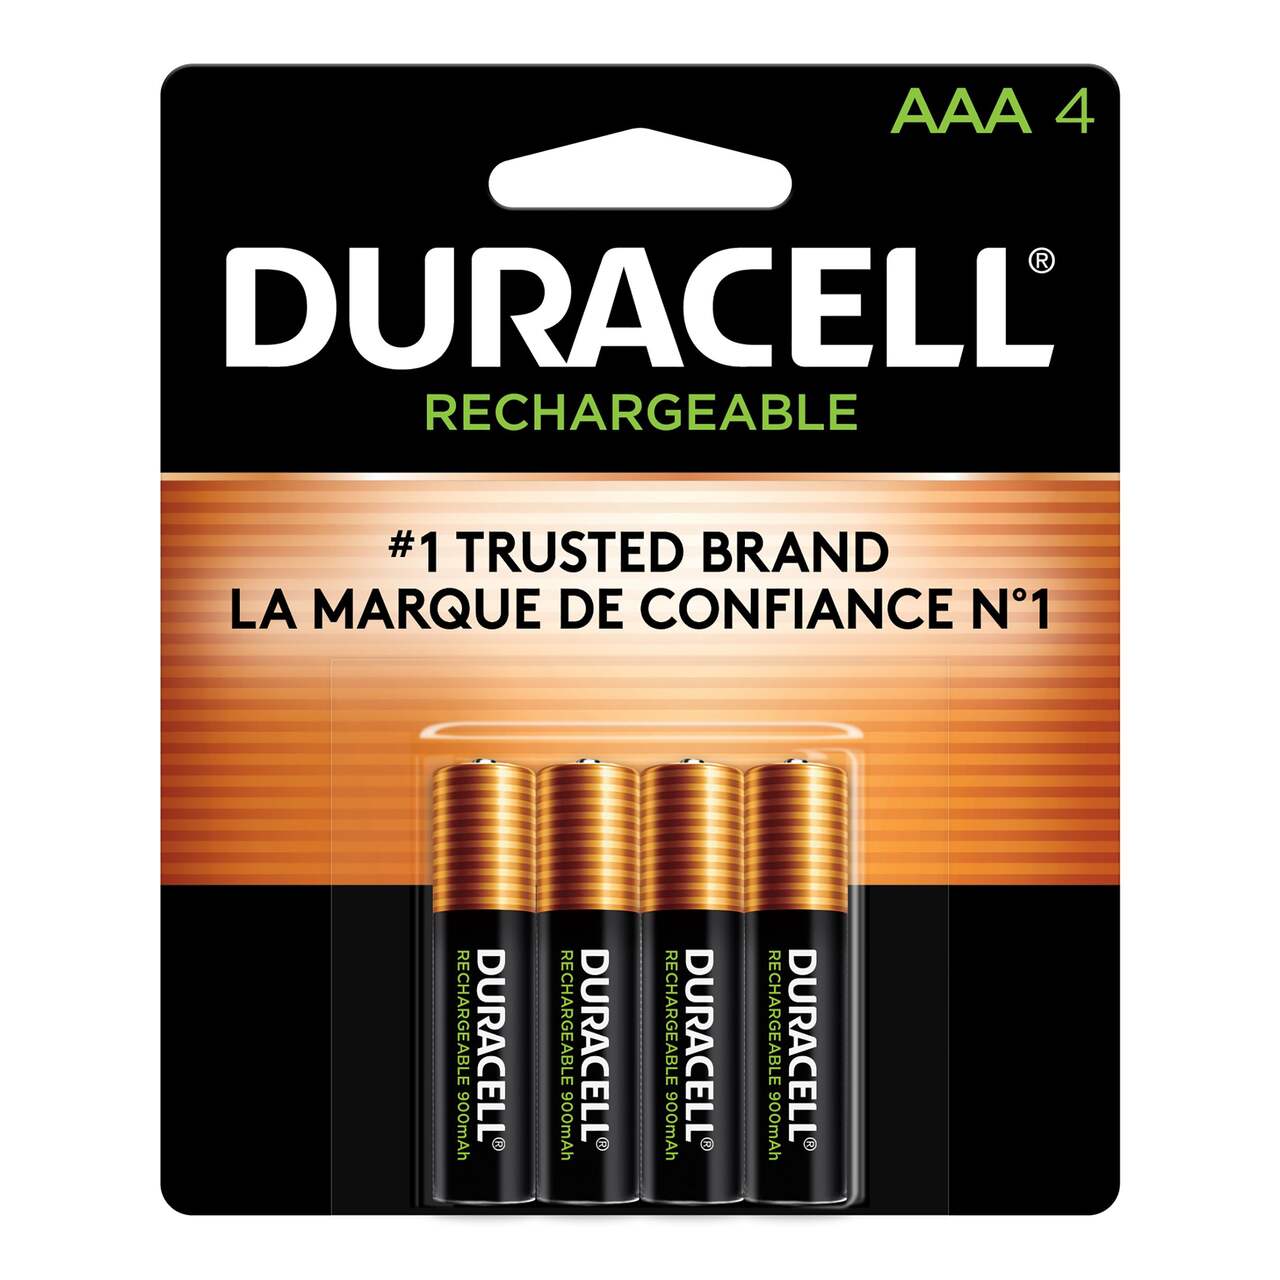 Duracell AAA Rechargeable Batteries, 4-pk